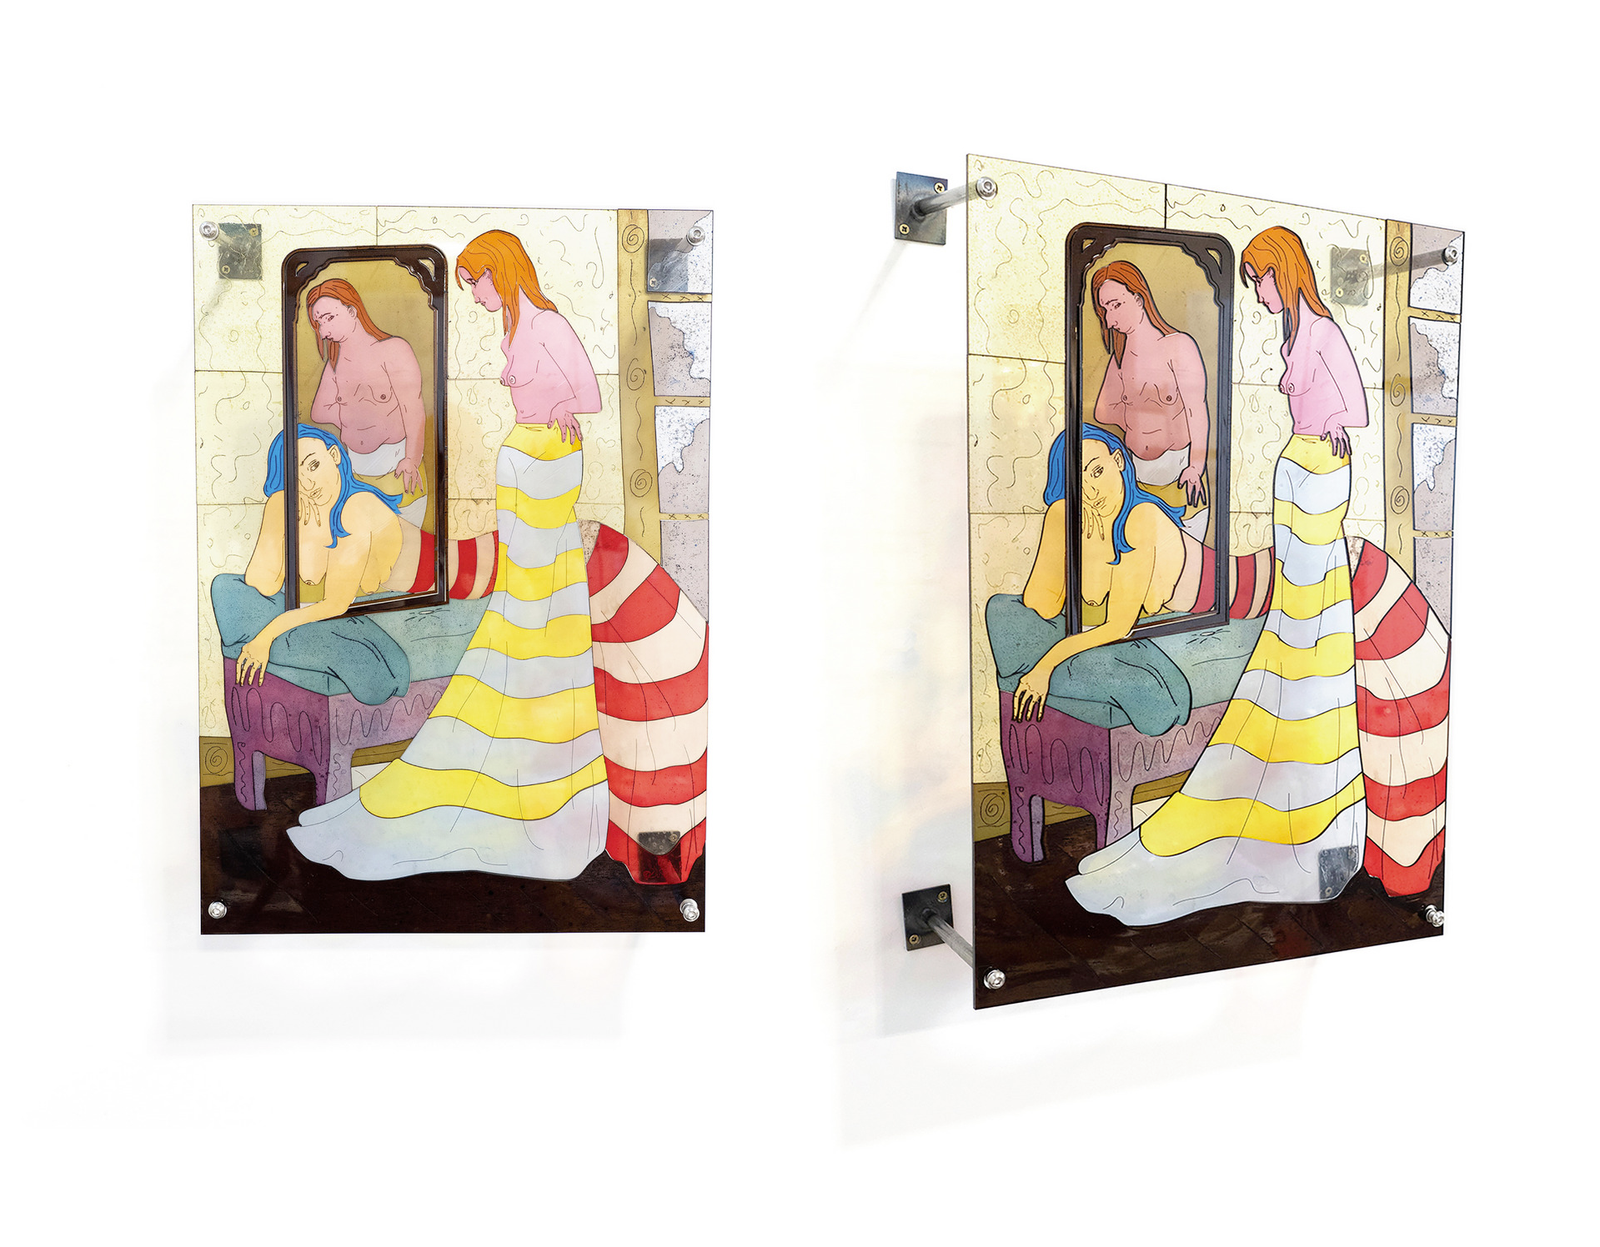 Acrylic glass painting portraying a standing woman, a lying woman and a woman inside of a mirror frame all in striped dresses